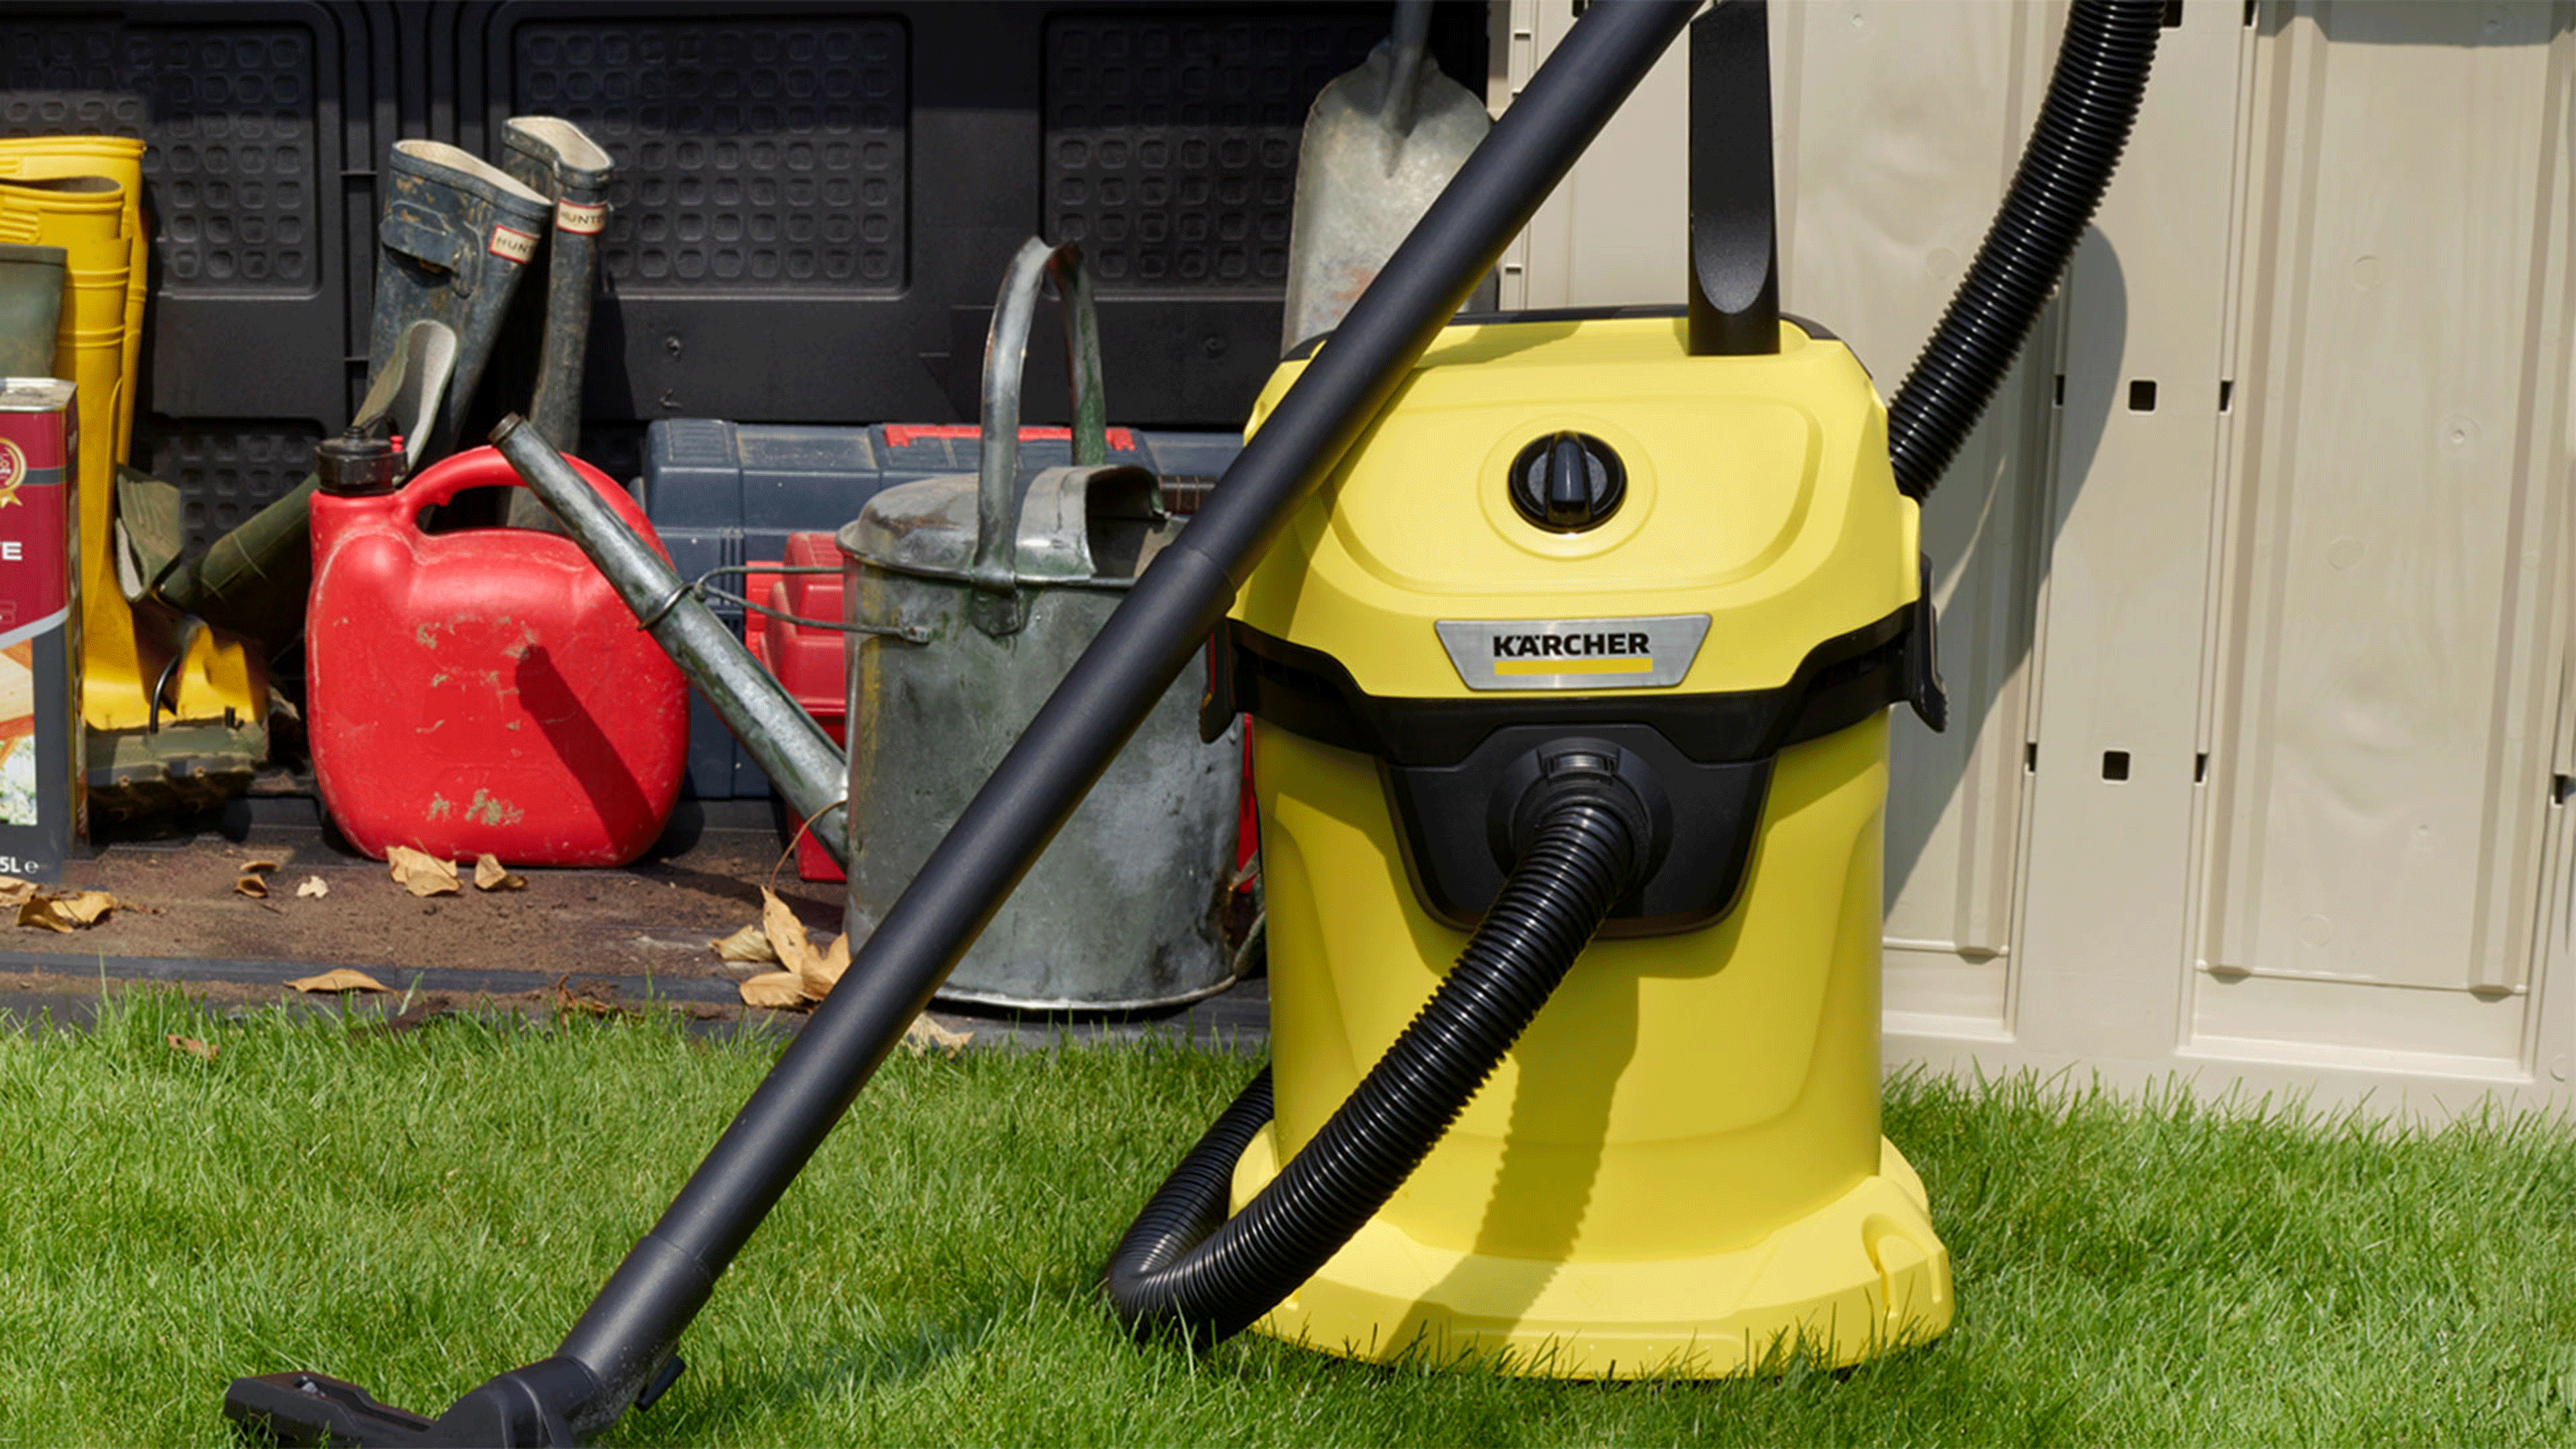 Karcher wet and dry vacuum cleaner infront of green table 